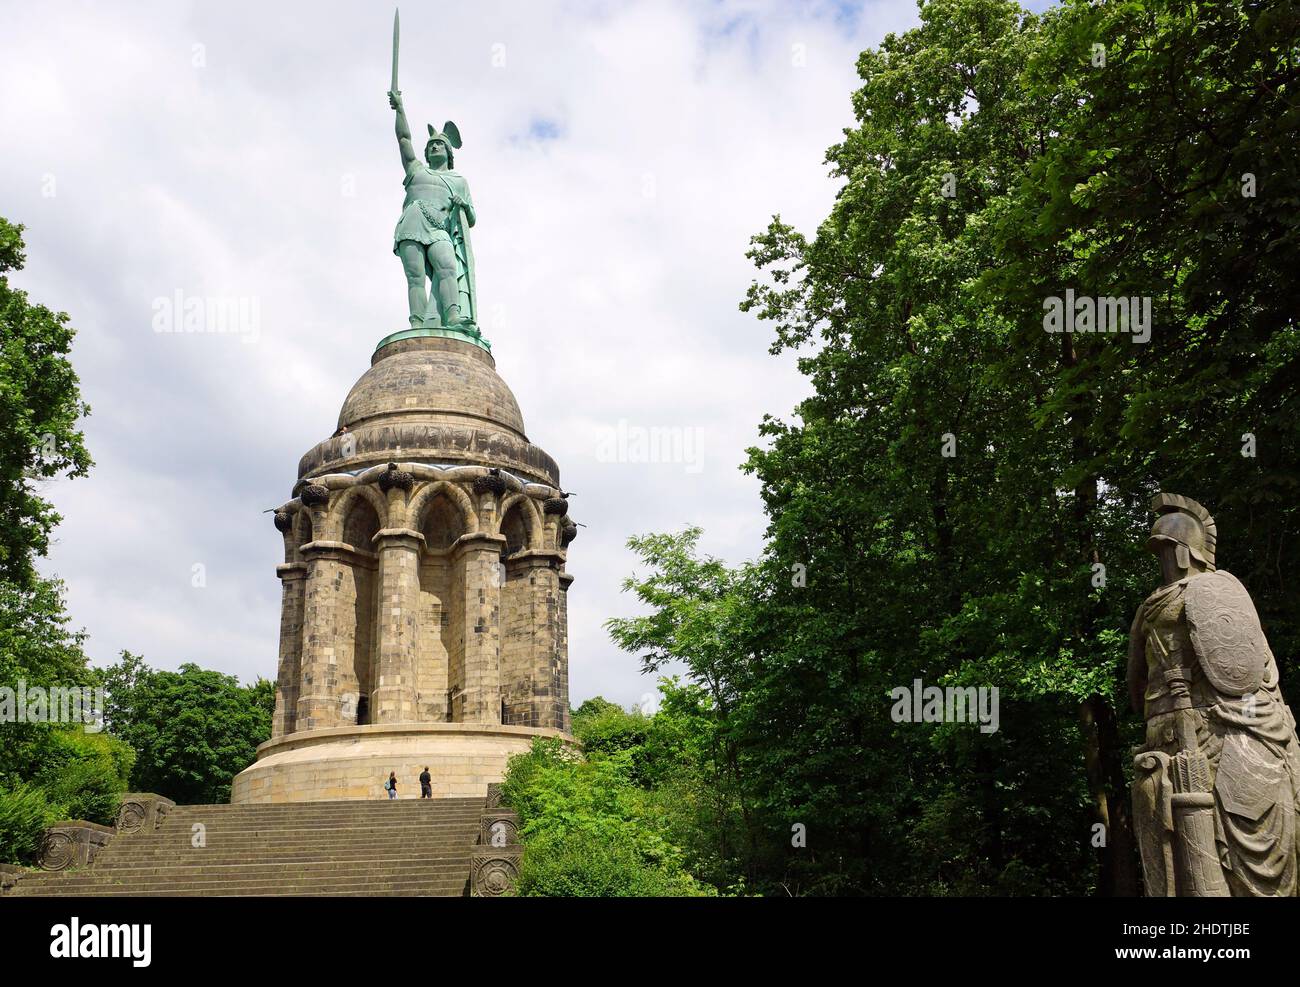 hermann monument, colossal statue, hermann monuments Stock Photo